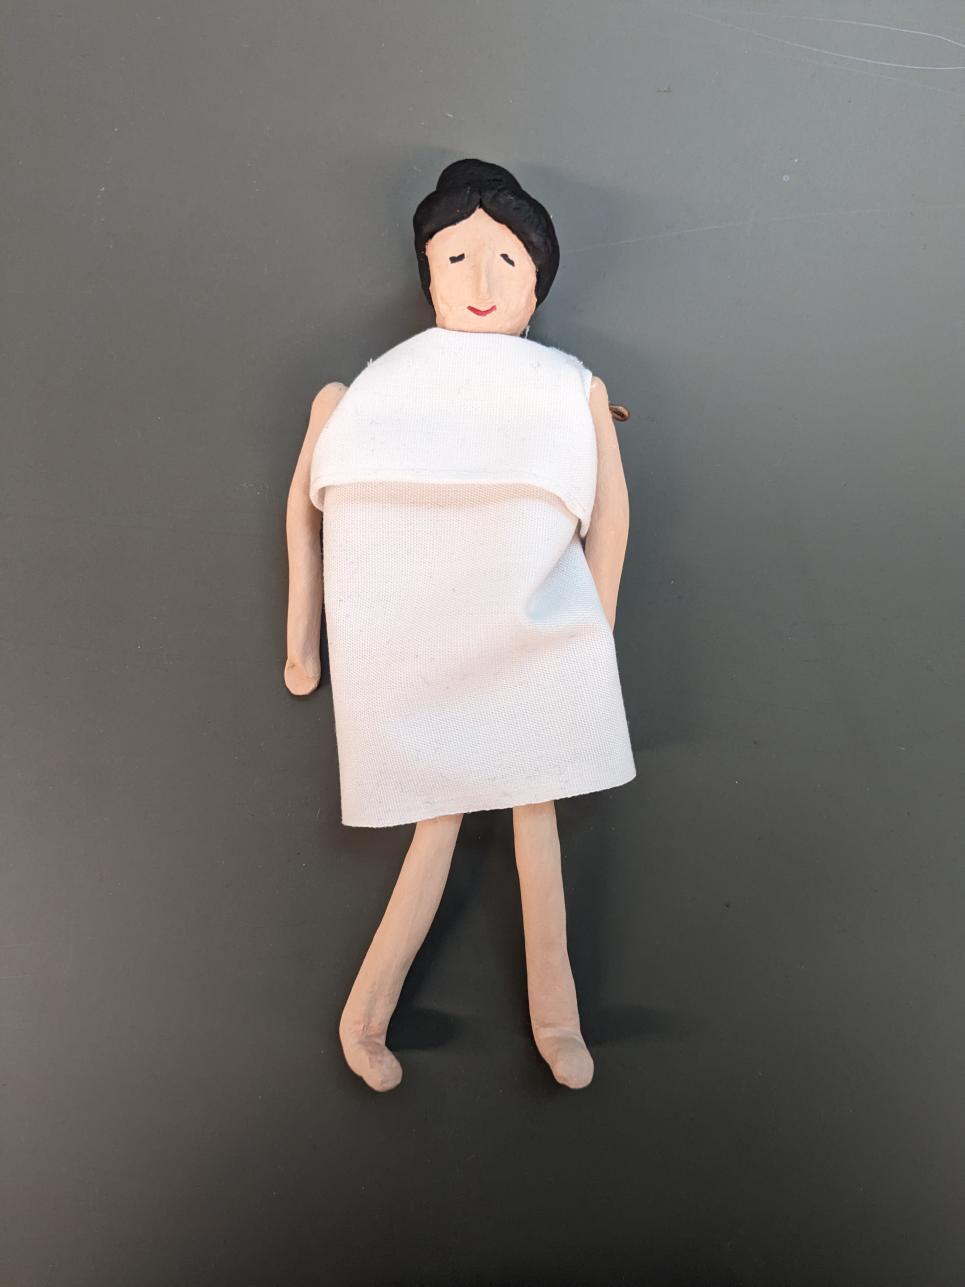 Recreation of an ancient Greek jointed doll Greek jointed doll